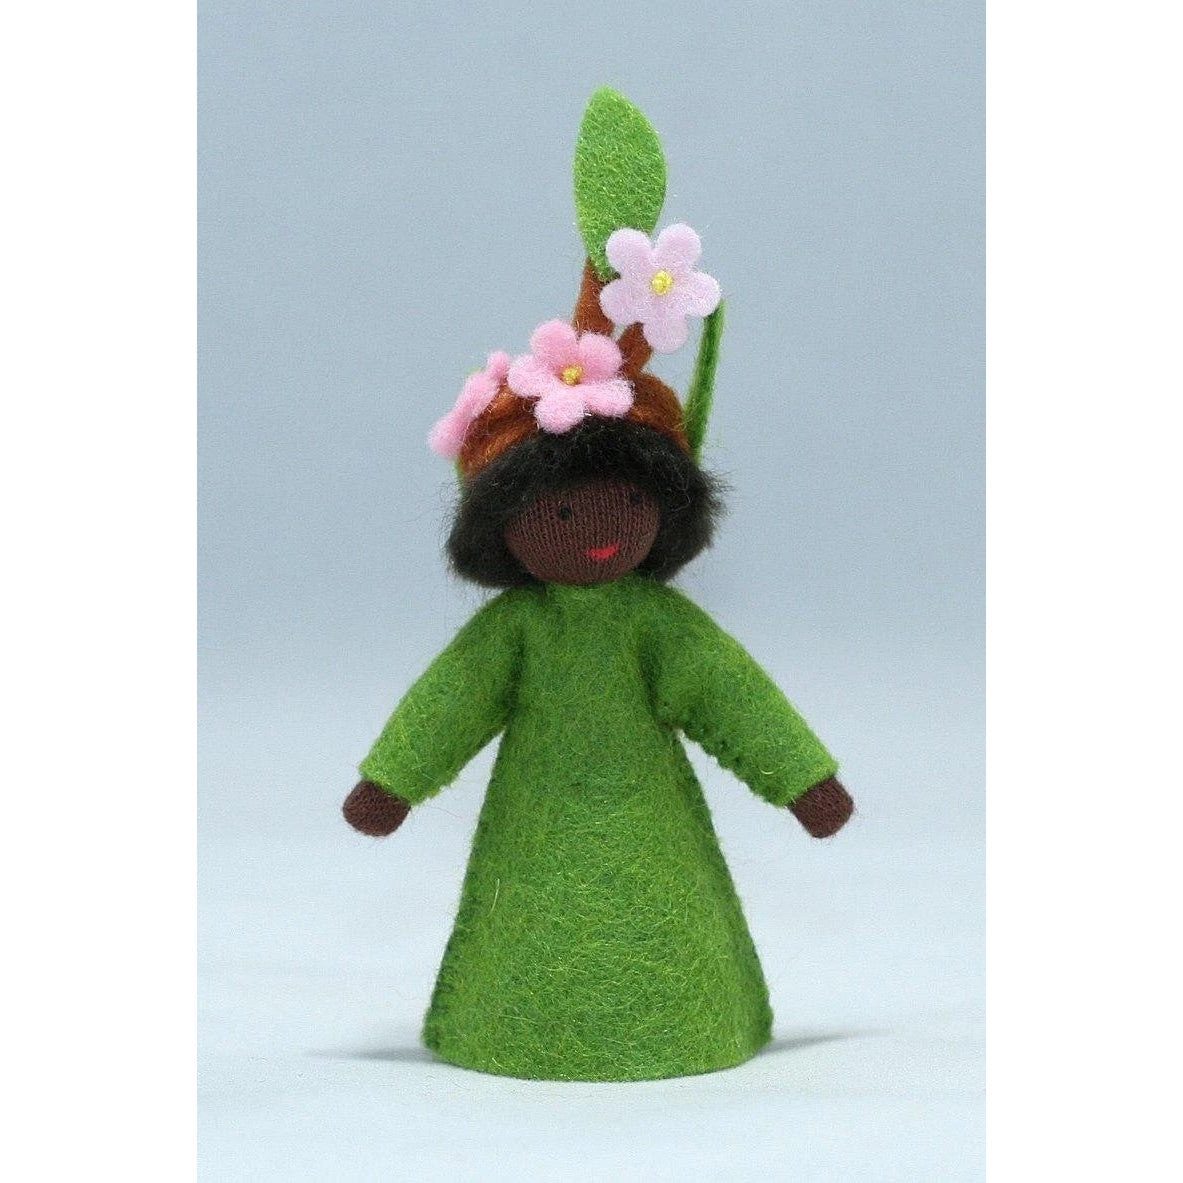 Blooming Branch Doll with Flower on Head